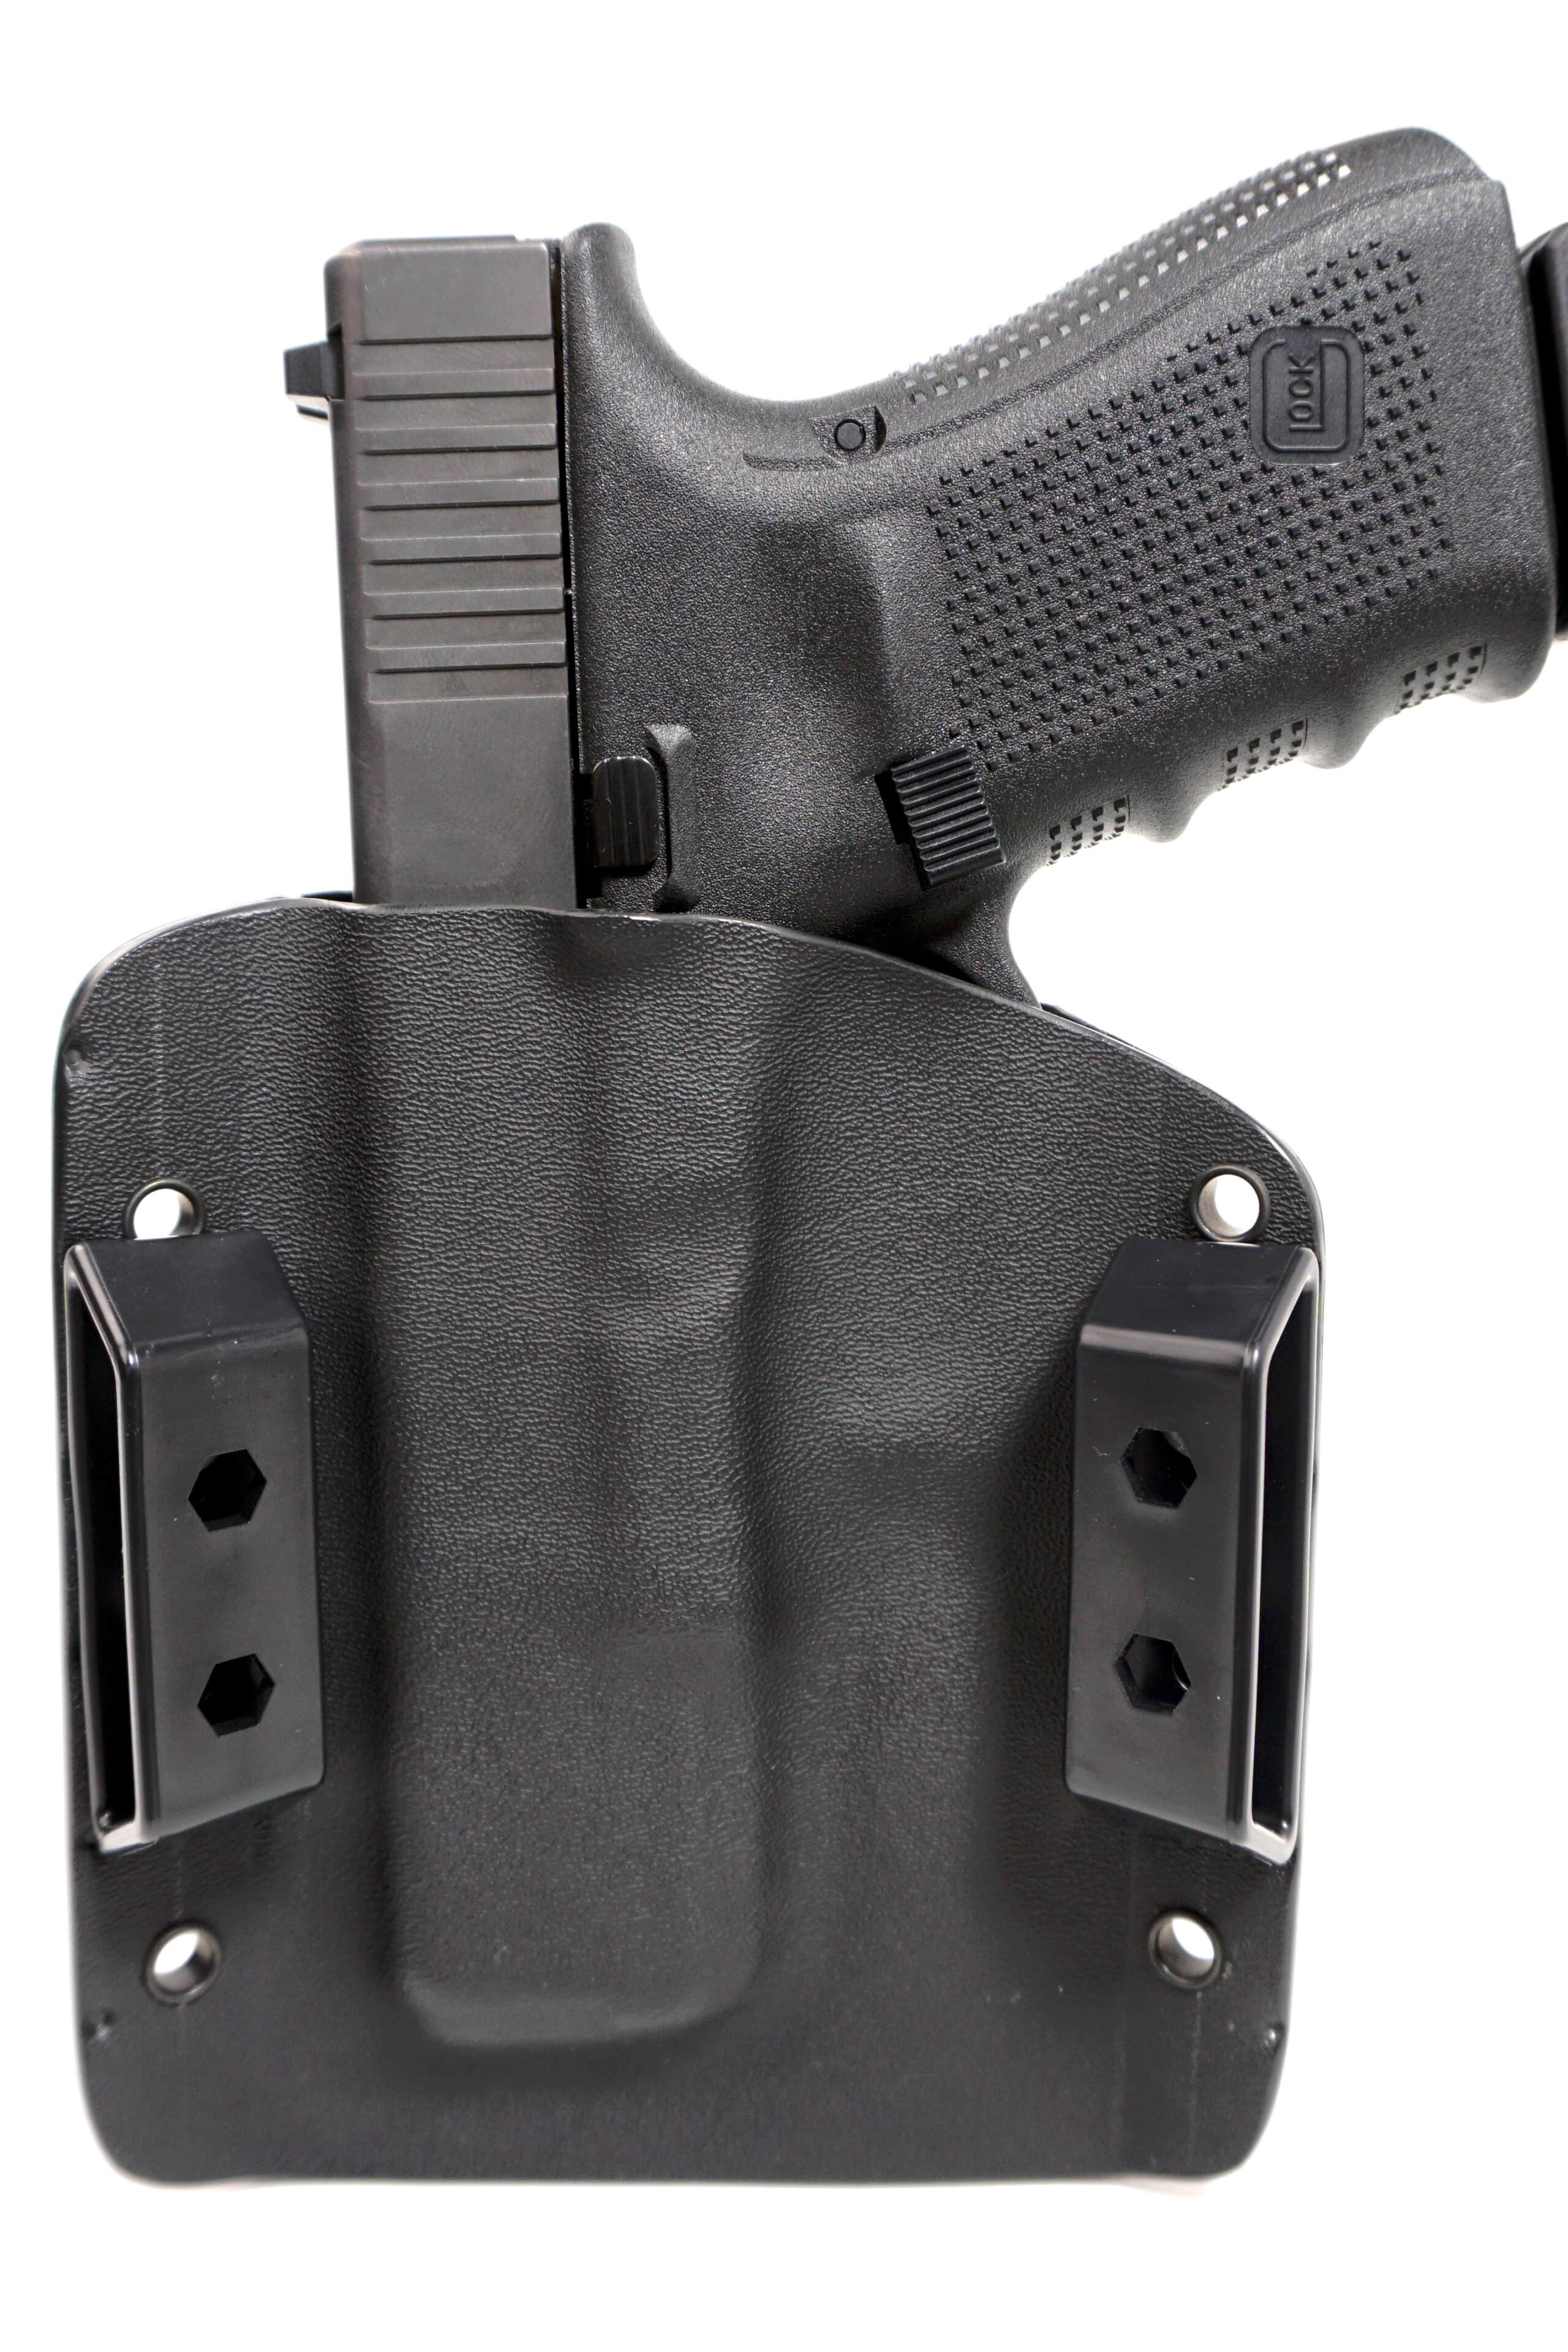 OWB Kydex Holster Blood Red S&W Smith & Wesson